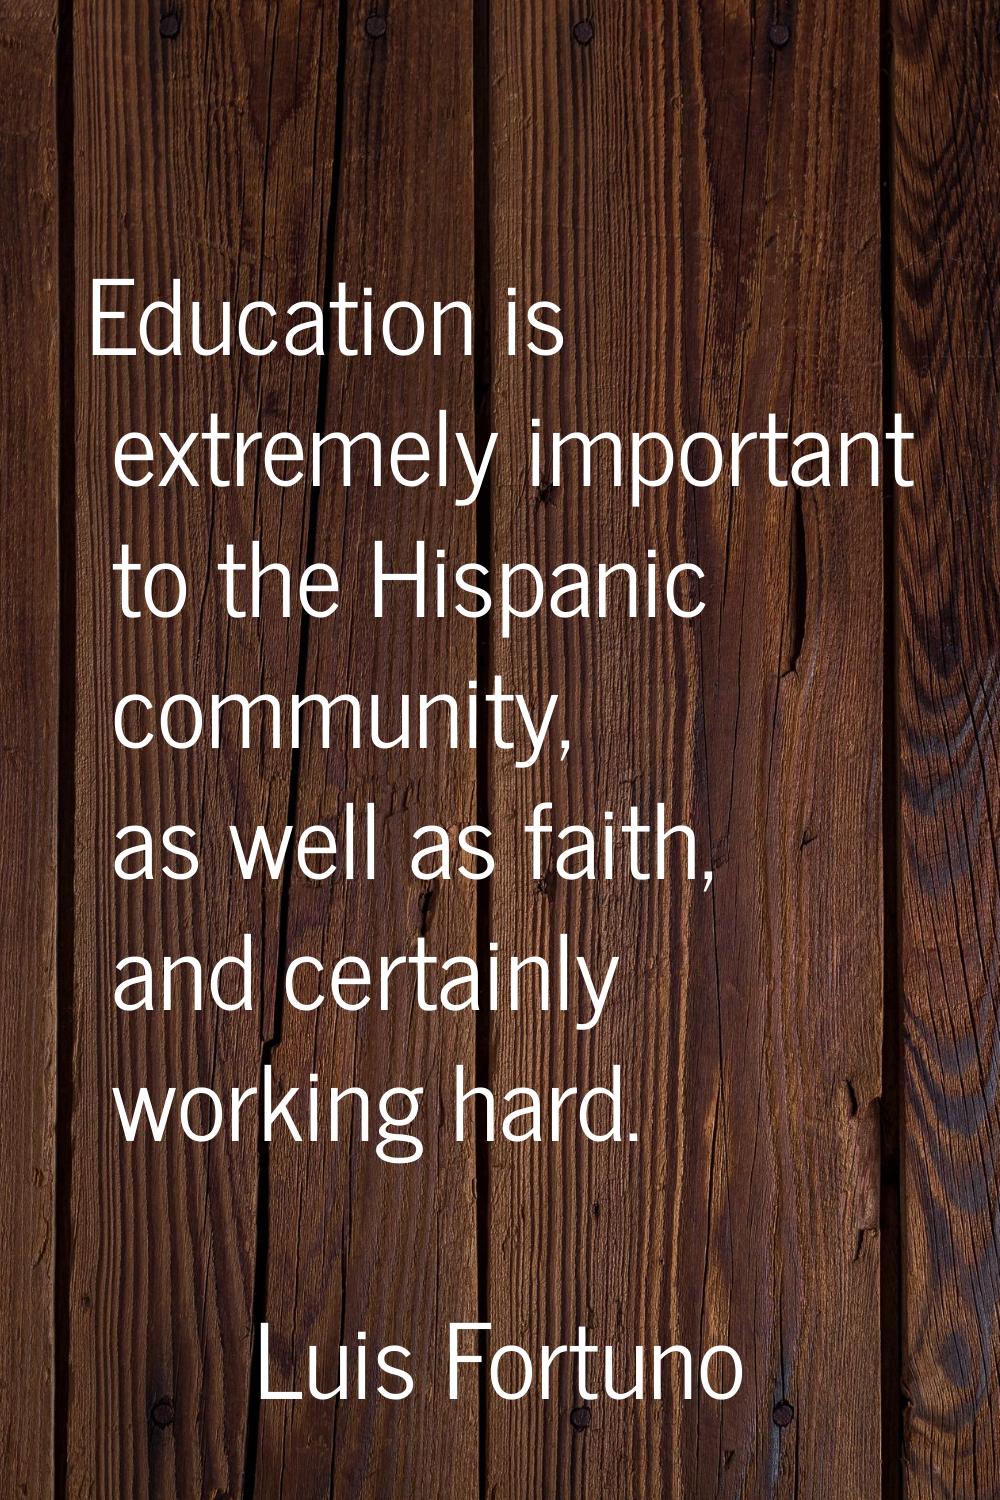 Education is extremely important to the Hispanic community, as well as faith, and certainly working